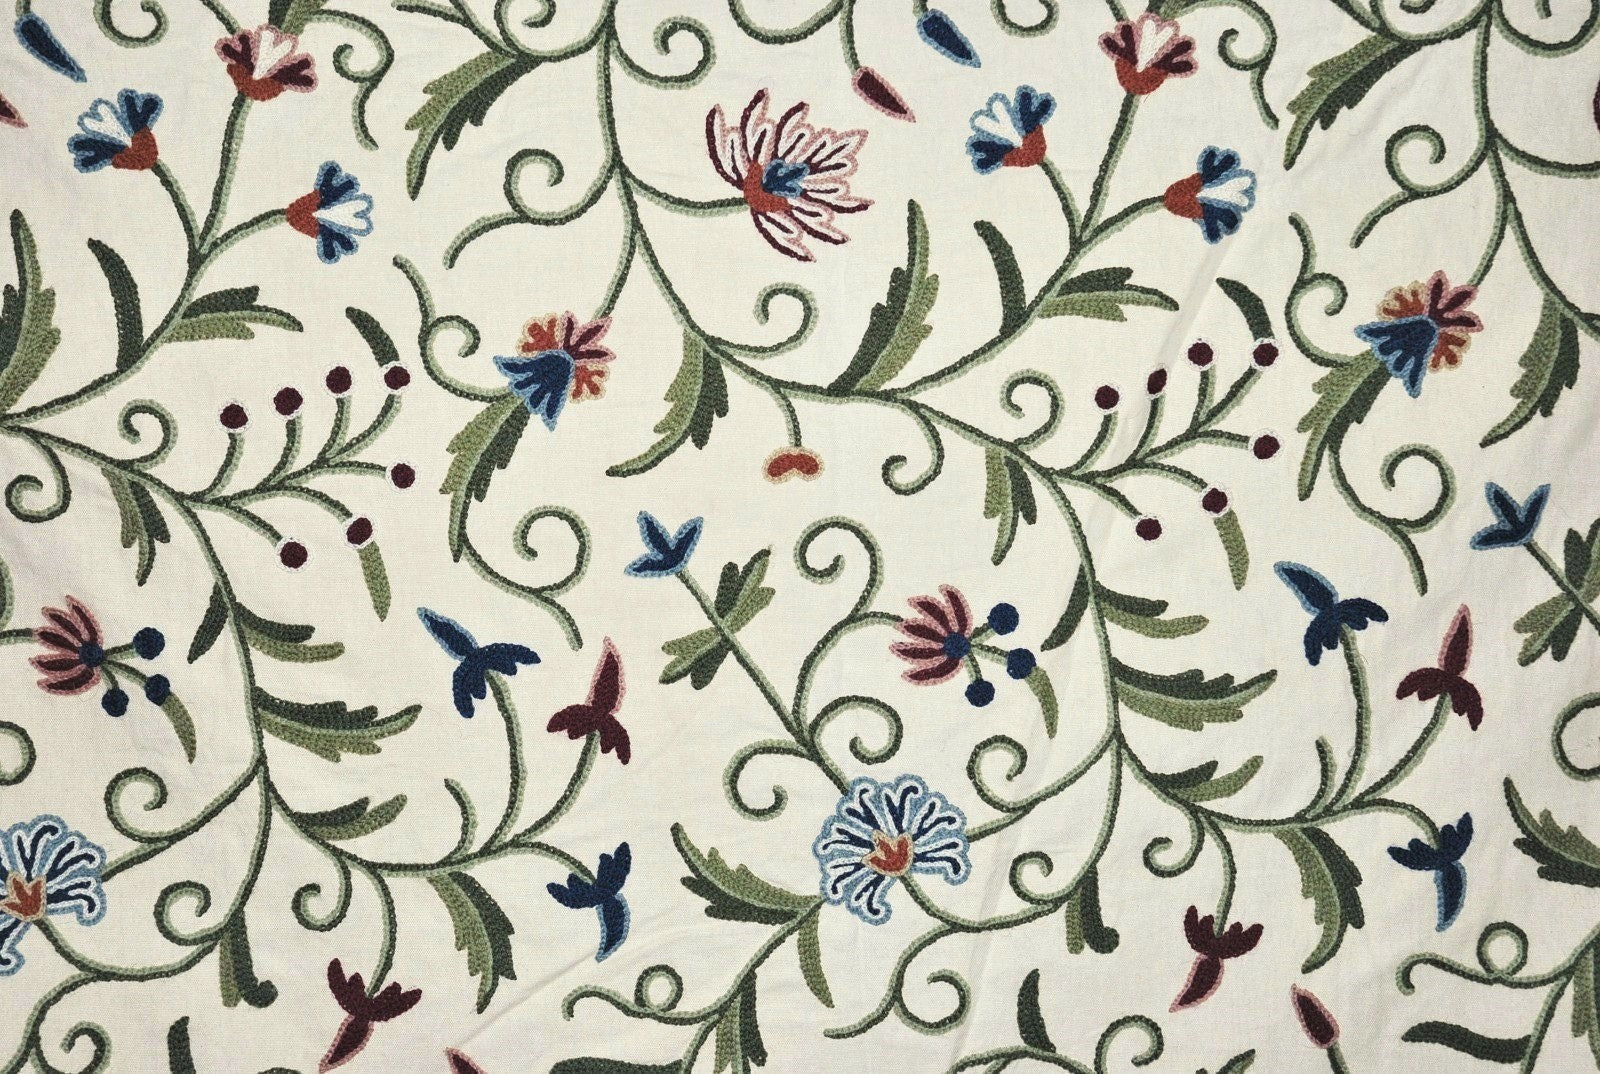 Derry 130 White Embroidery Fabric  Embroidered Fabric - Crewel Fabric